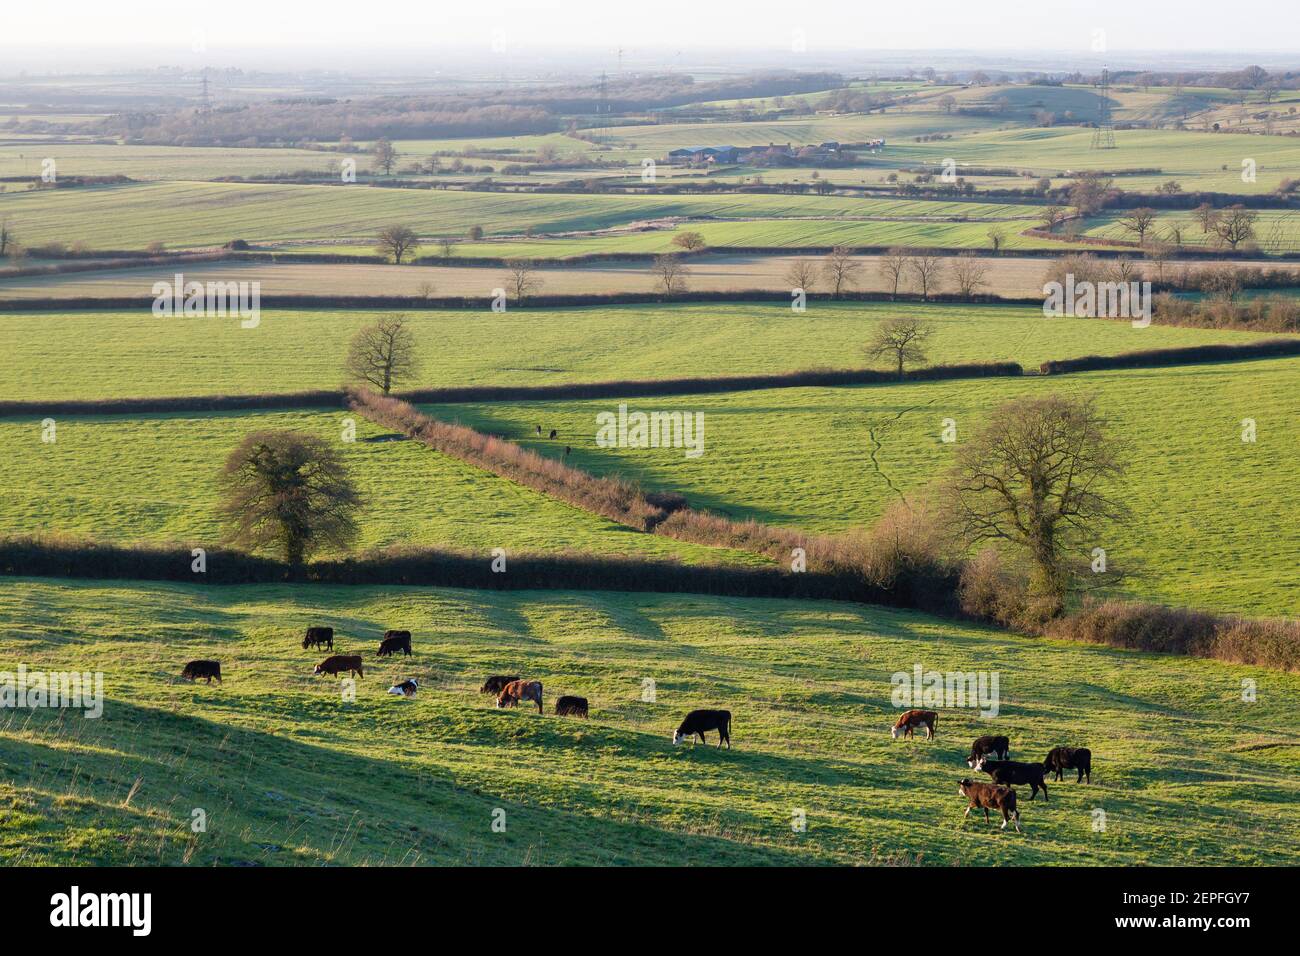 UK countryside with fields, hedgerows and a herd of cows. Aylesbury Vale, Buckinghamshire, UK Stock Photo